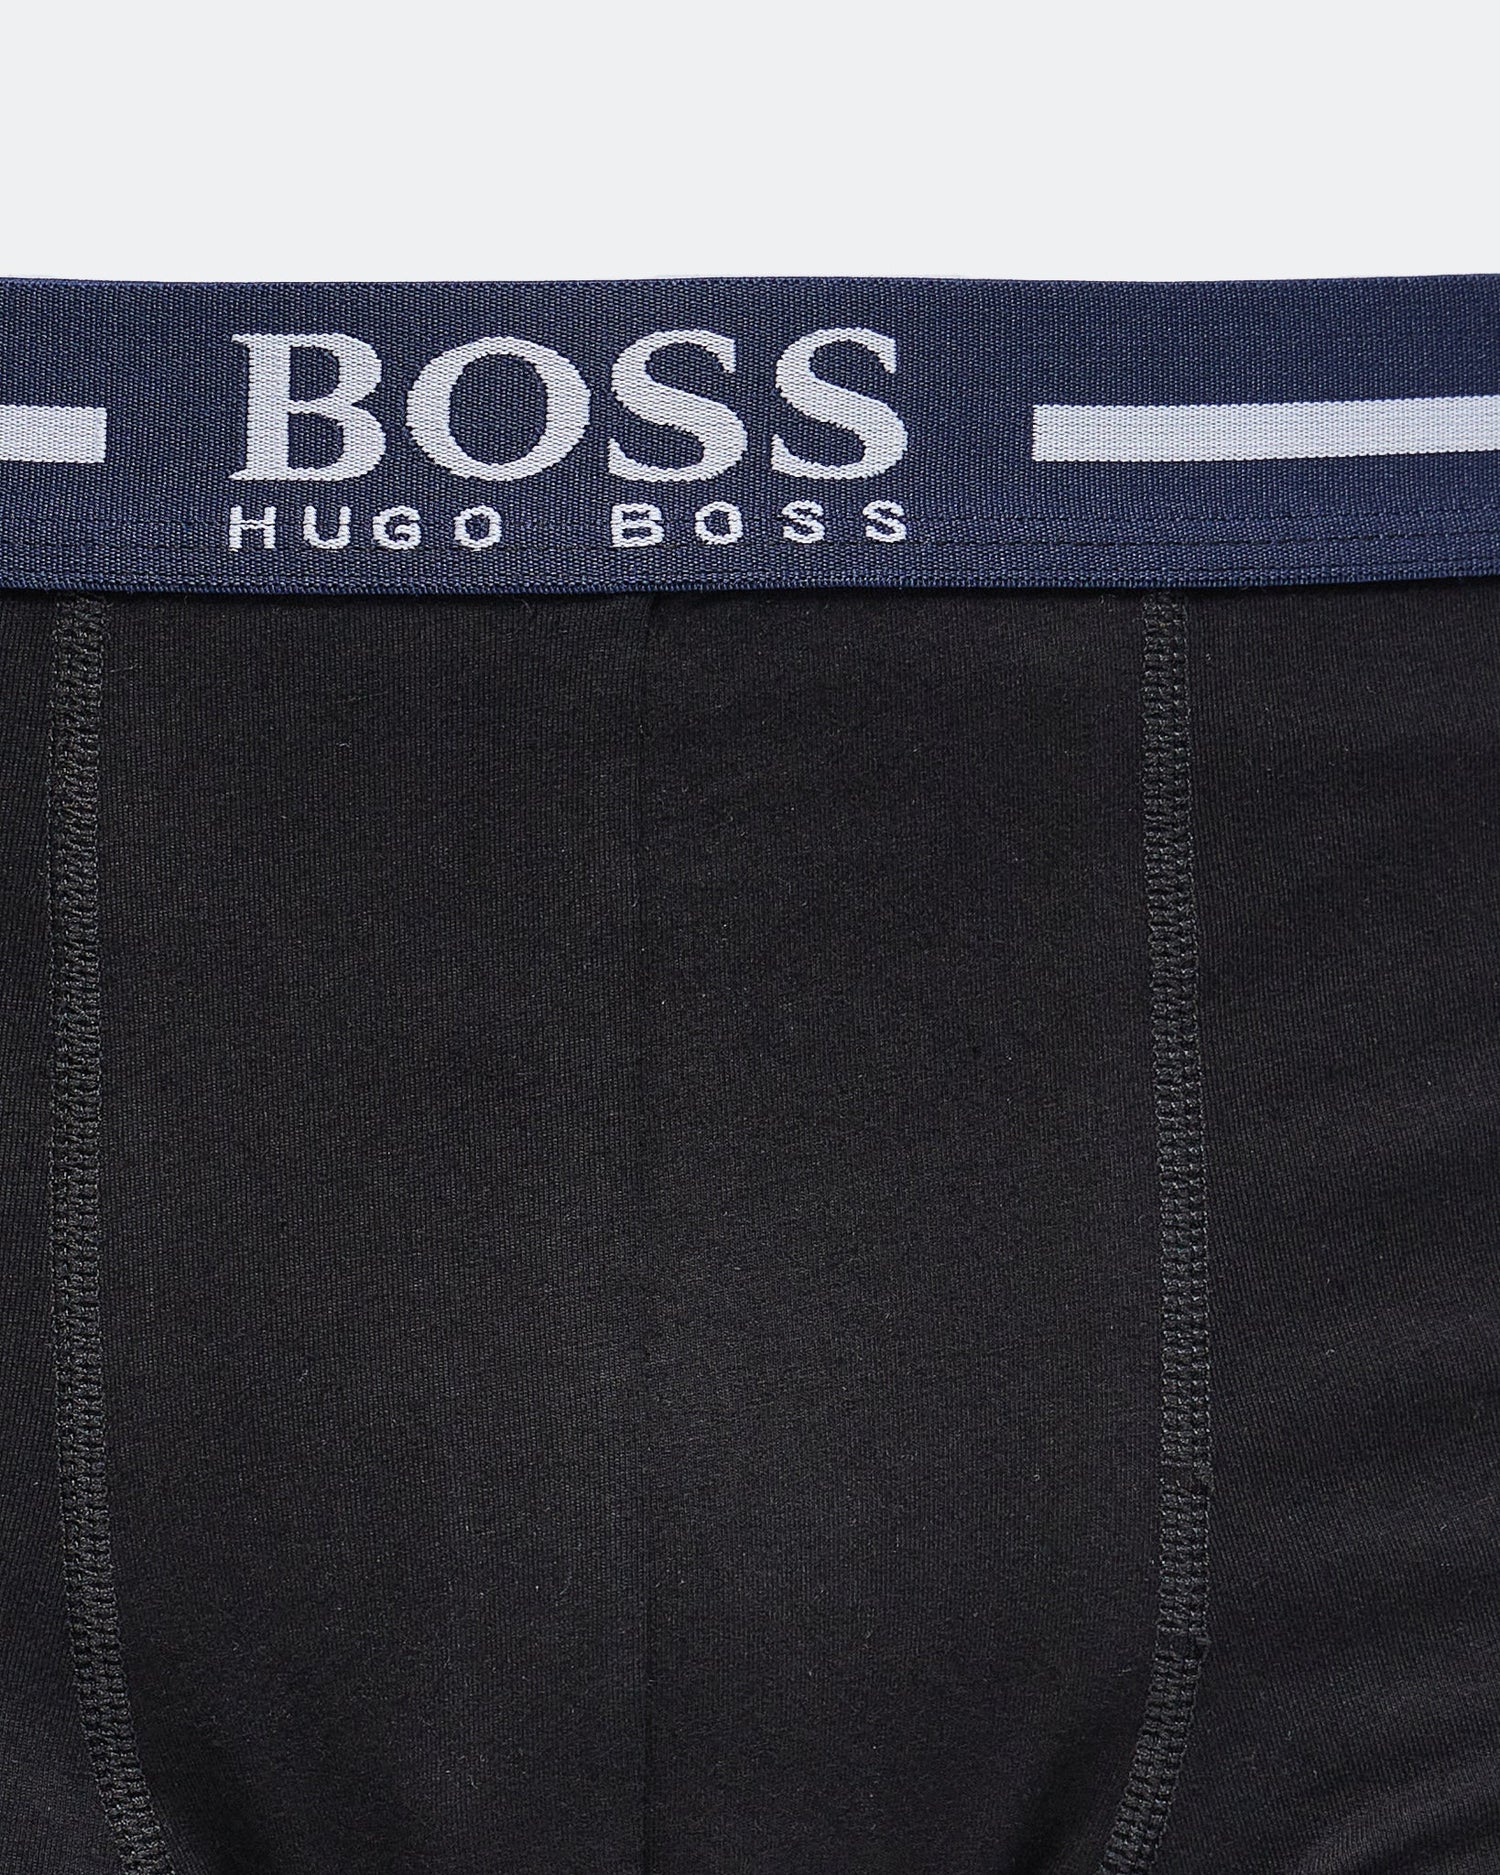 MOI OUTFIT-Boss Logo Embroidered Men Underwear 6.50